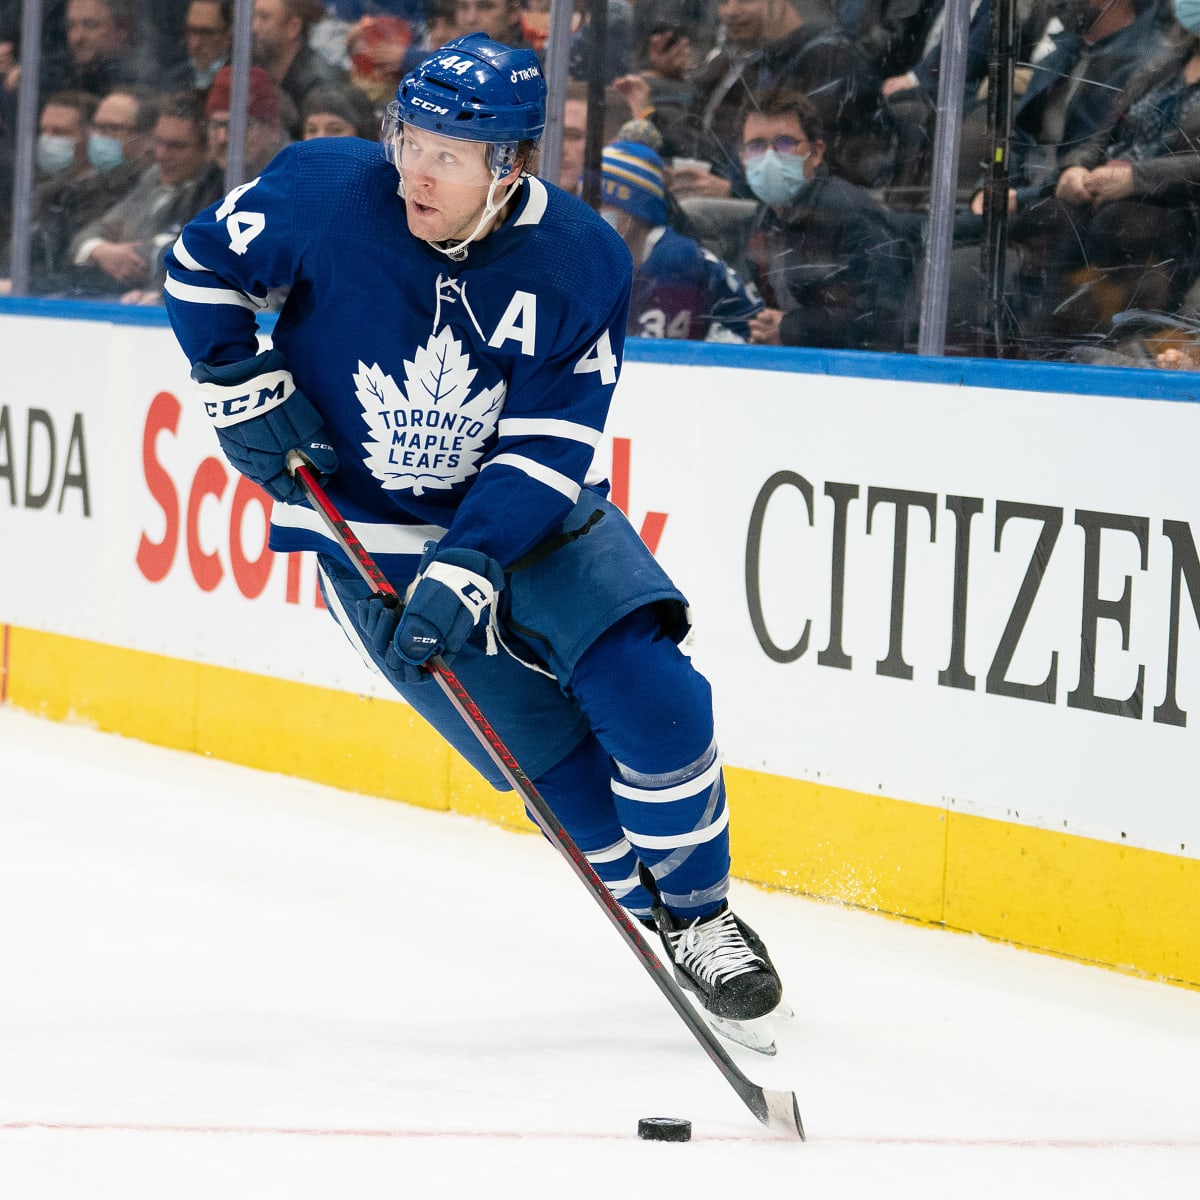 New York Rangers at Toronto Maple Leafs Live Stream Watch Online, TV Channel, Start Time - How to Watch and Stream Major League and College Sports 